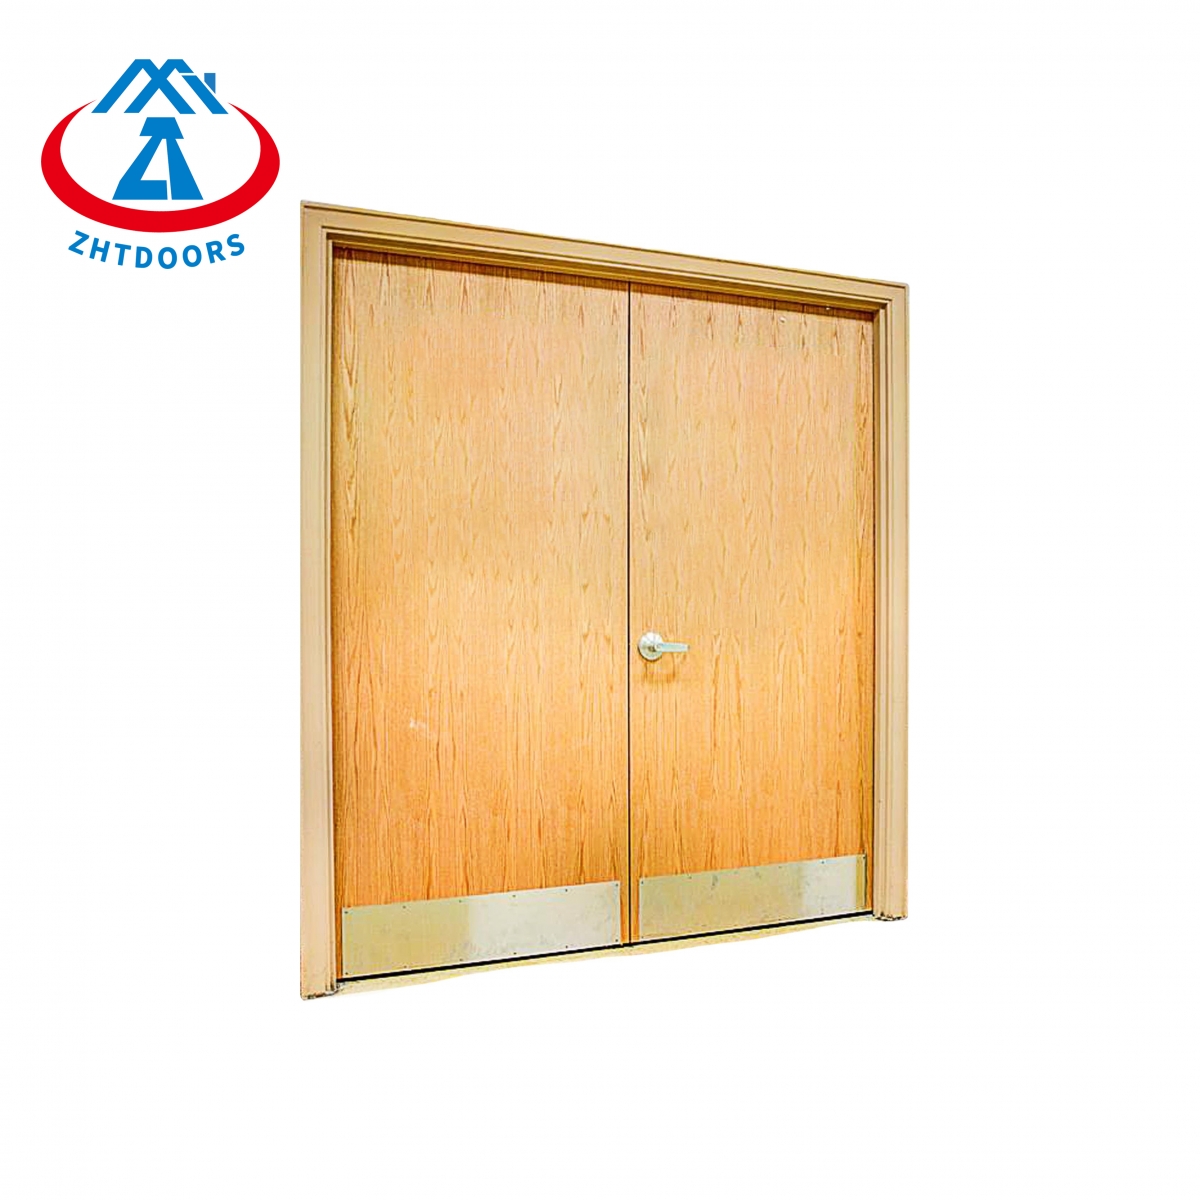 Asico UL Listed Wood Fire Rated Timber Hotel Door-ZTFIRE Door- Fire Door,Fireproof Door,Fire rated Door,Fire Resistant Door,Steel Door,Metal Door,Exit Door